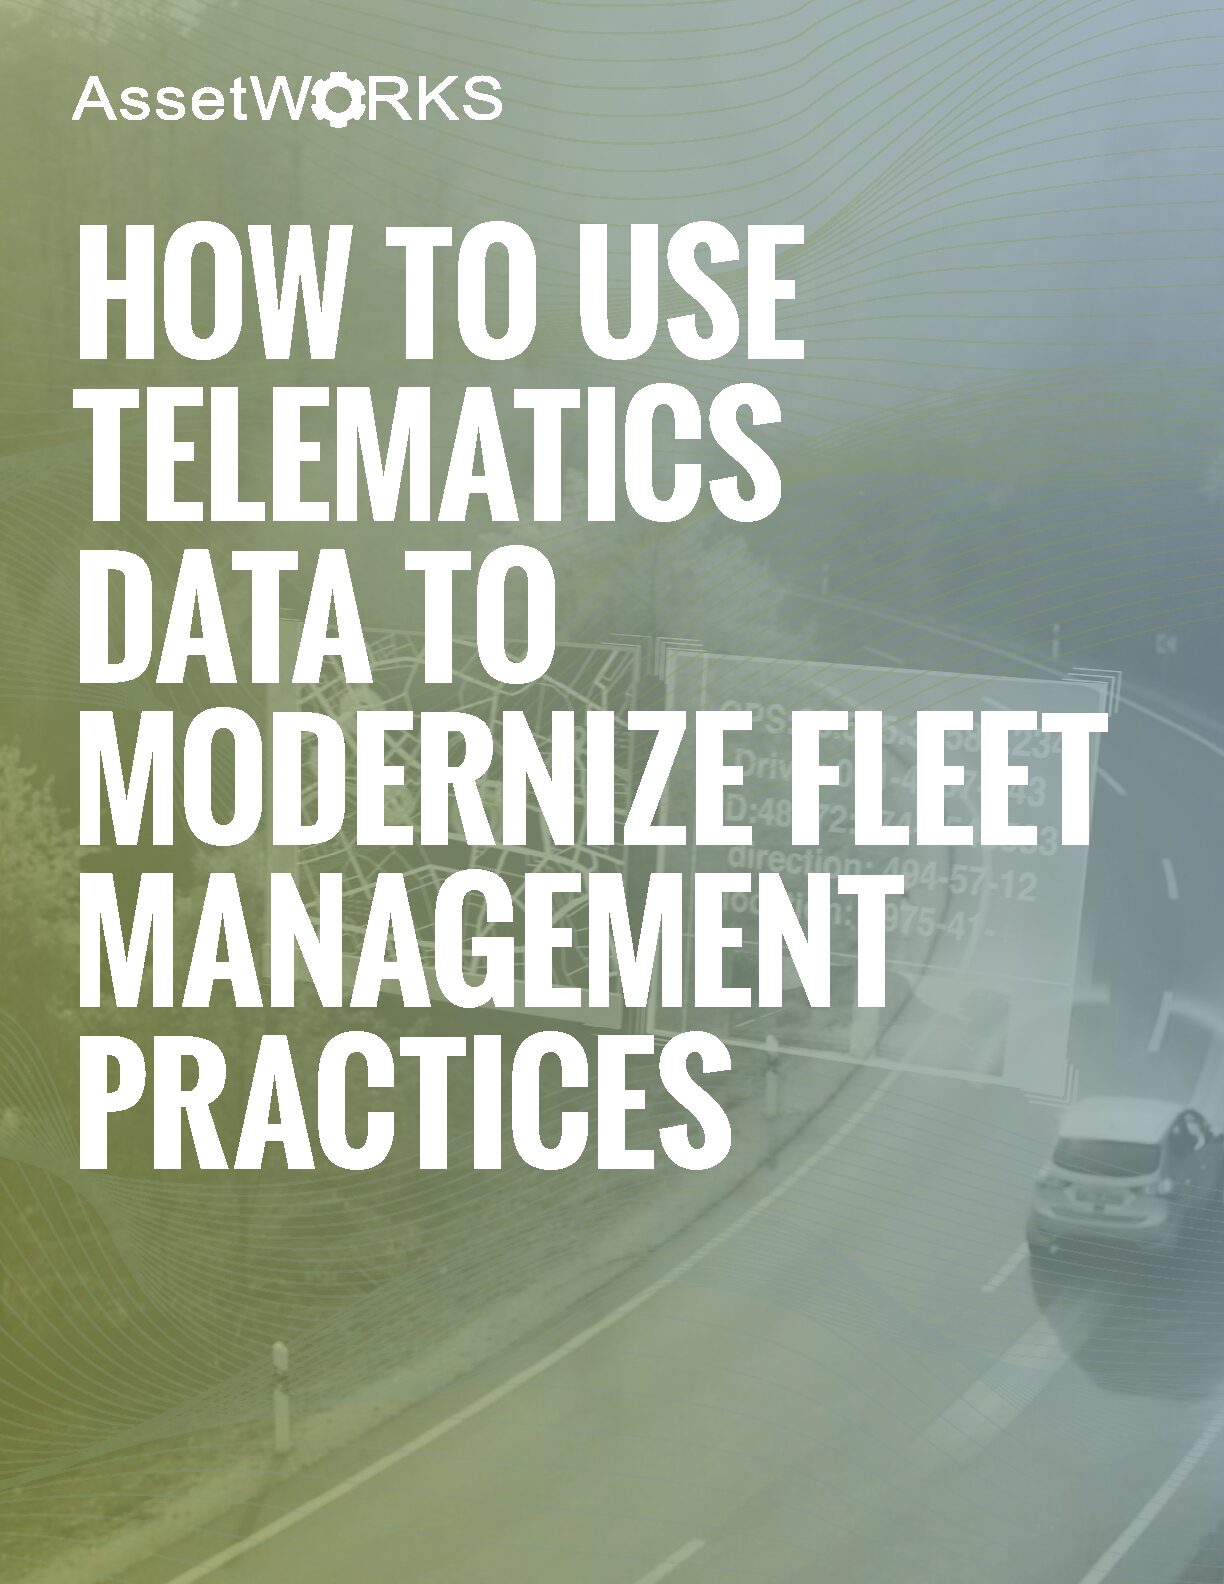 How to Use Telematics Data to Modernize Fleet Management Practices_Page_1